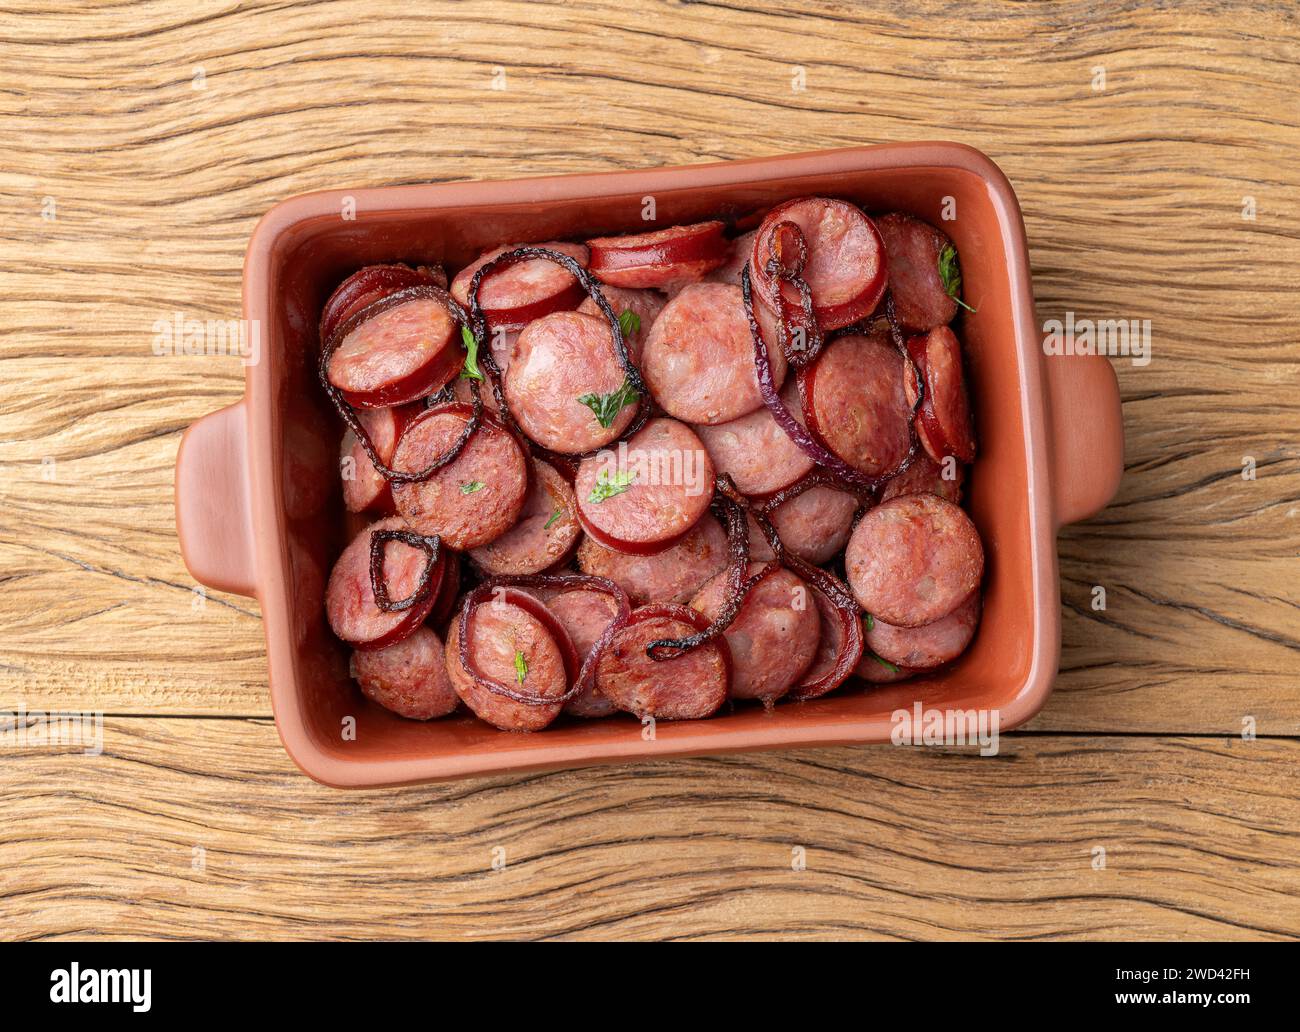 Grilled calabrese sausage portion with onion over wooden table. Stock Photo